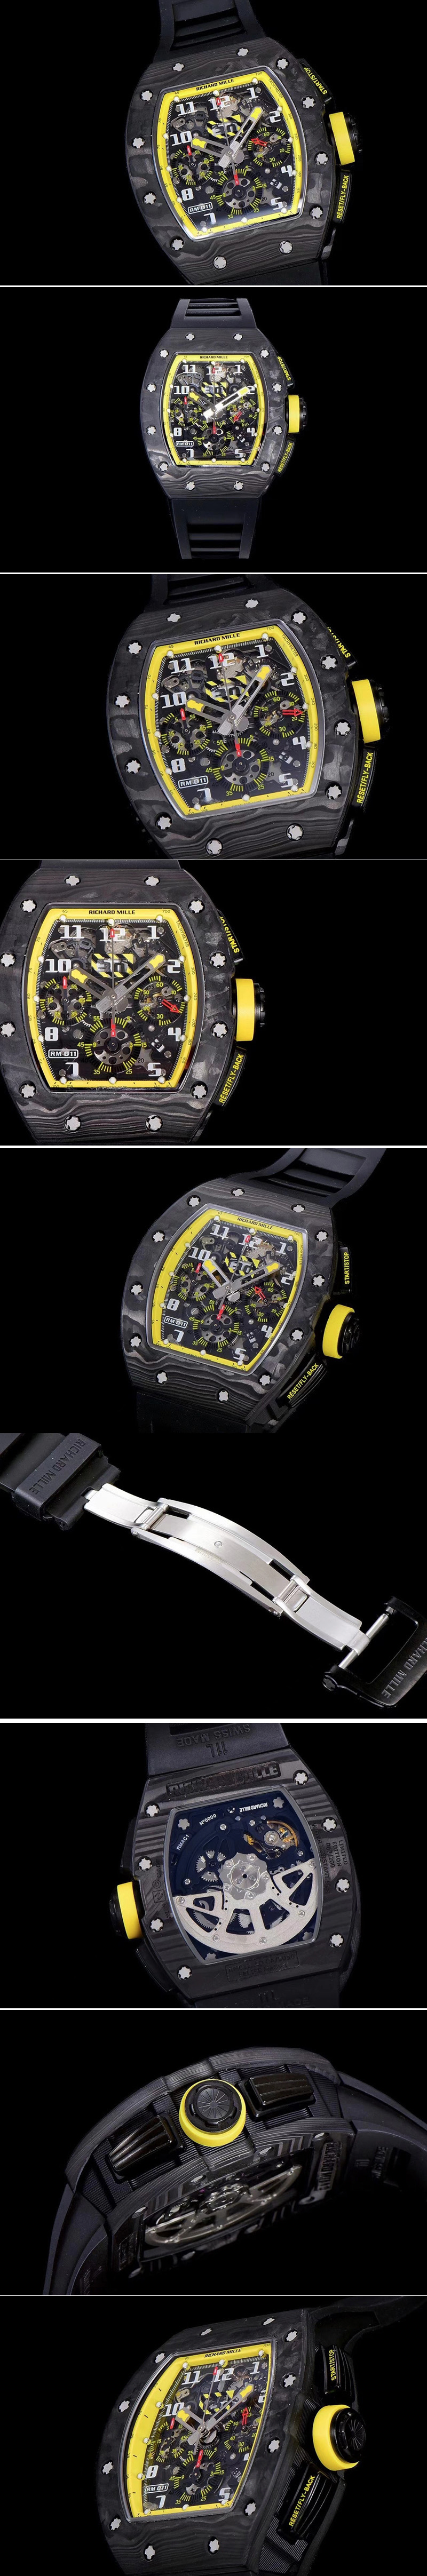 Replica Richard Mille RM011 NTPT Carbon Chrono KVF 1:1 Best Edition Crystal Skeleton Dial Yellow Inner Bezel on Black Rubber Strap A7750